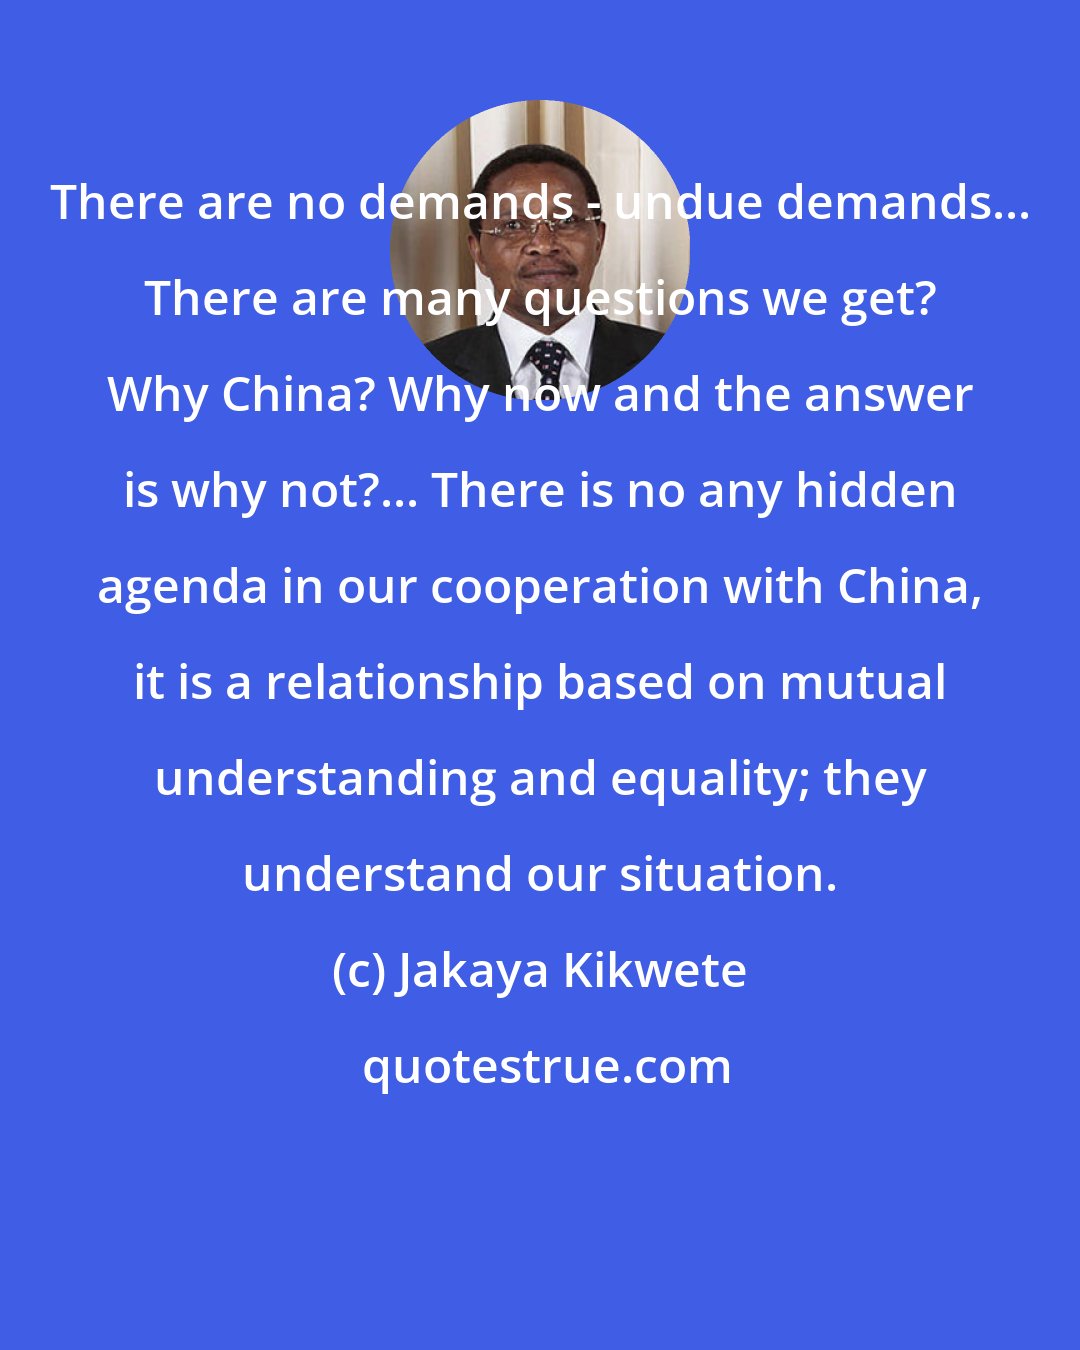 Jakaya Kikwete: There are no demands - undue demands... There are many questions we get? Why China? Why now and the answer is why not?... There is no any hidden agenda in our cooperation with China, it is a relationship based on mutual understanding and equality; they understand our situation.